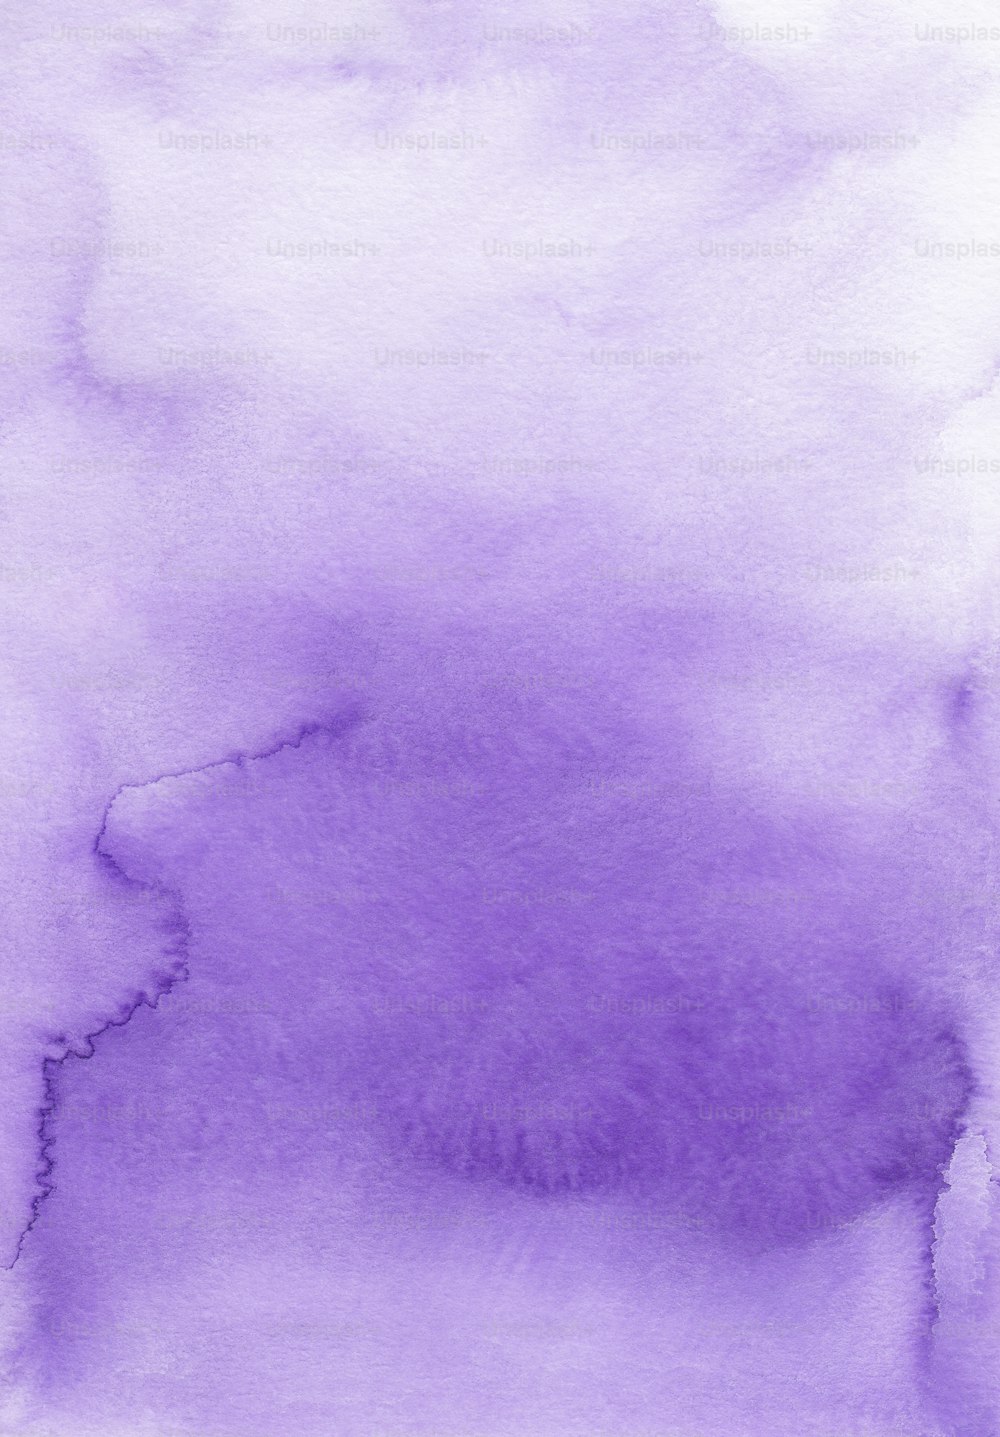 Premium Photo  A pink and purple watercolor background with the